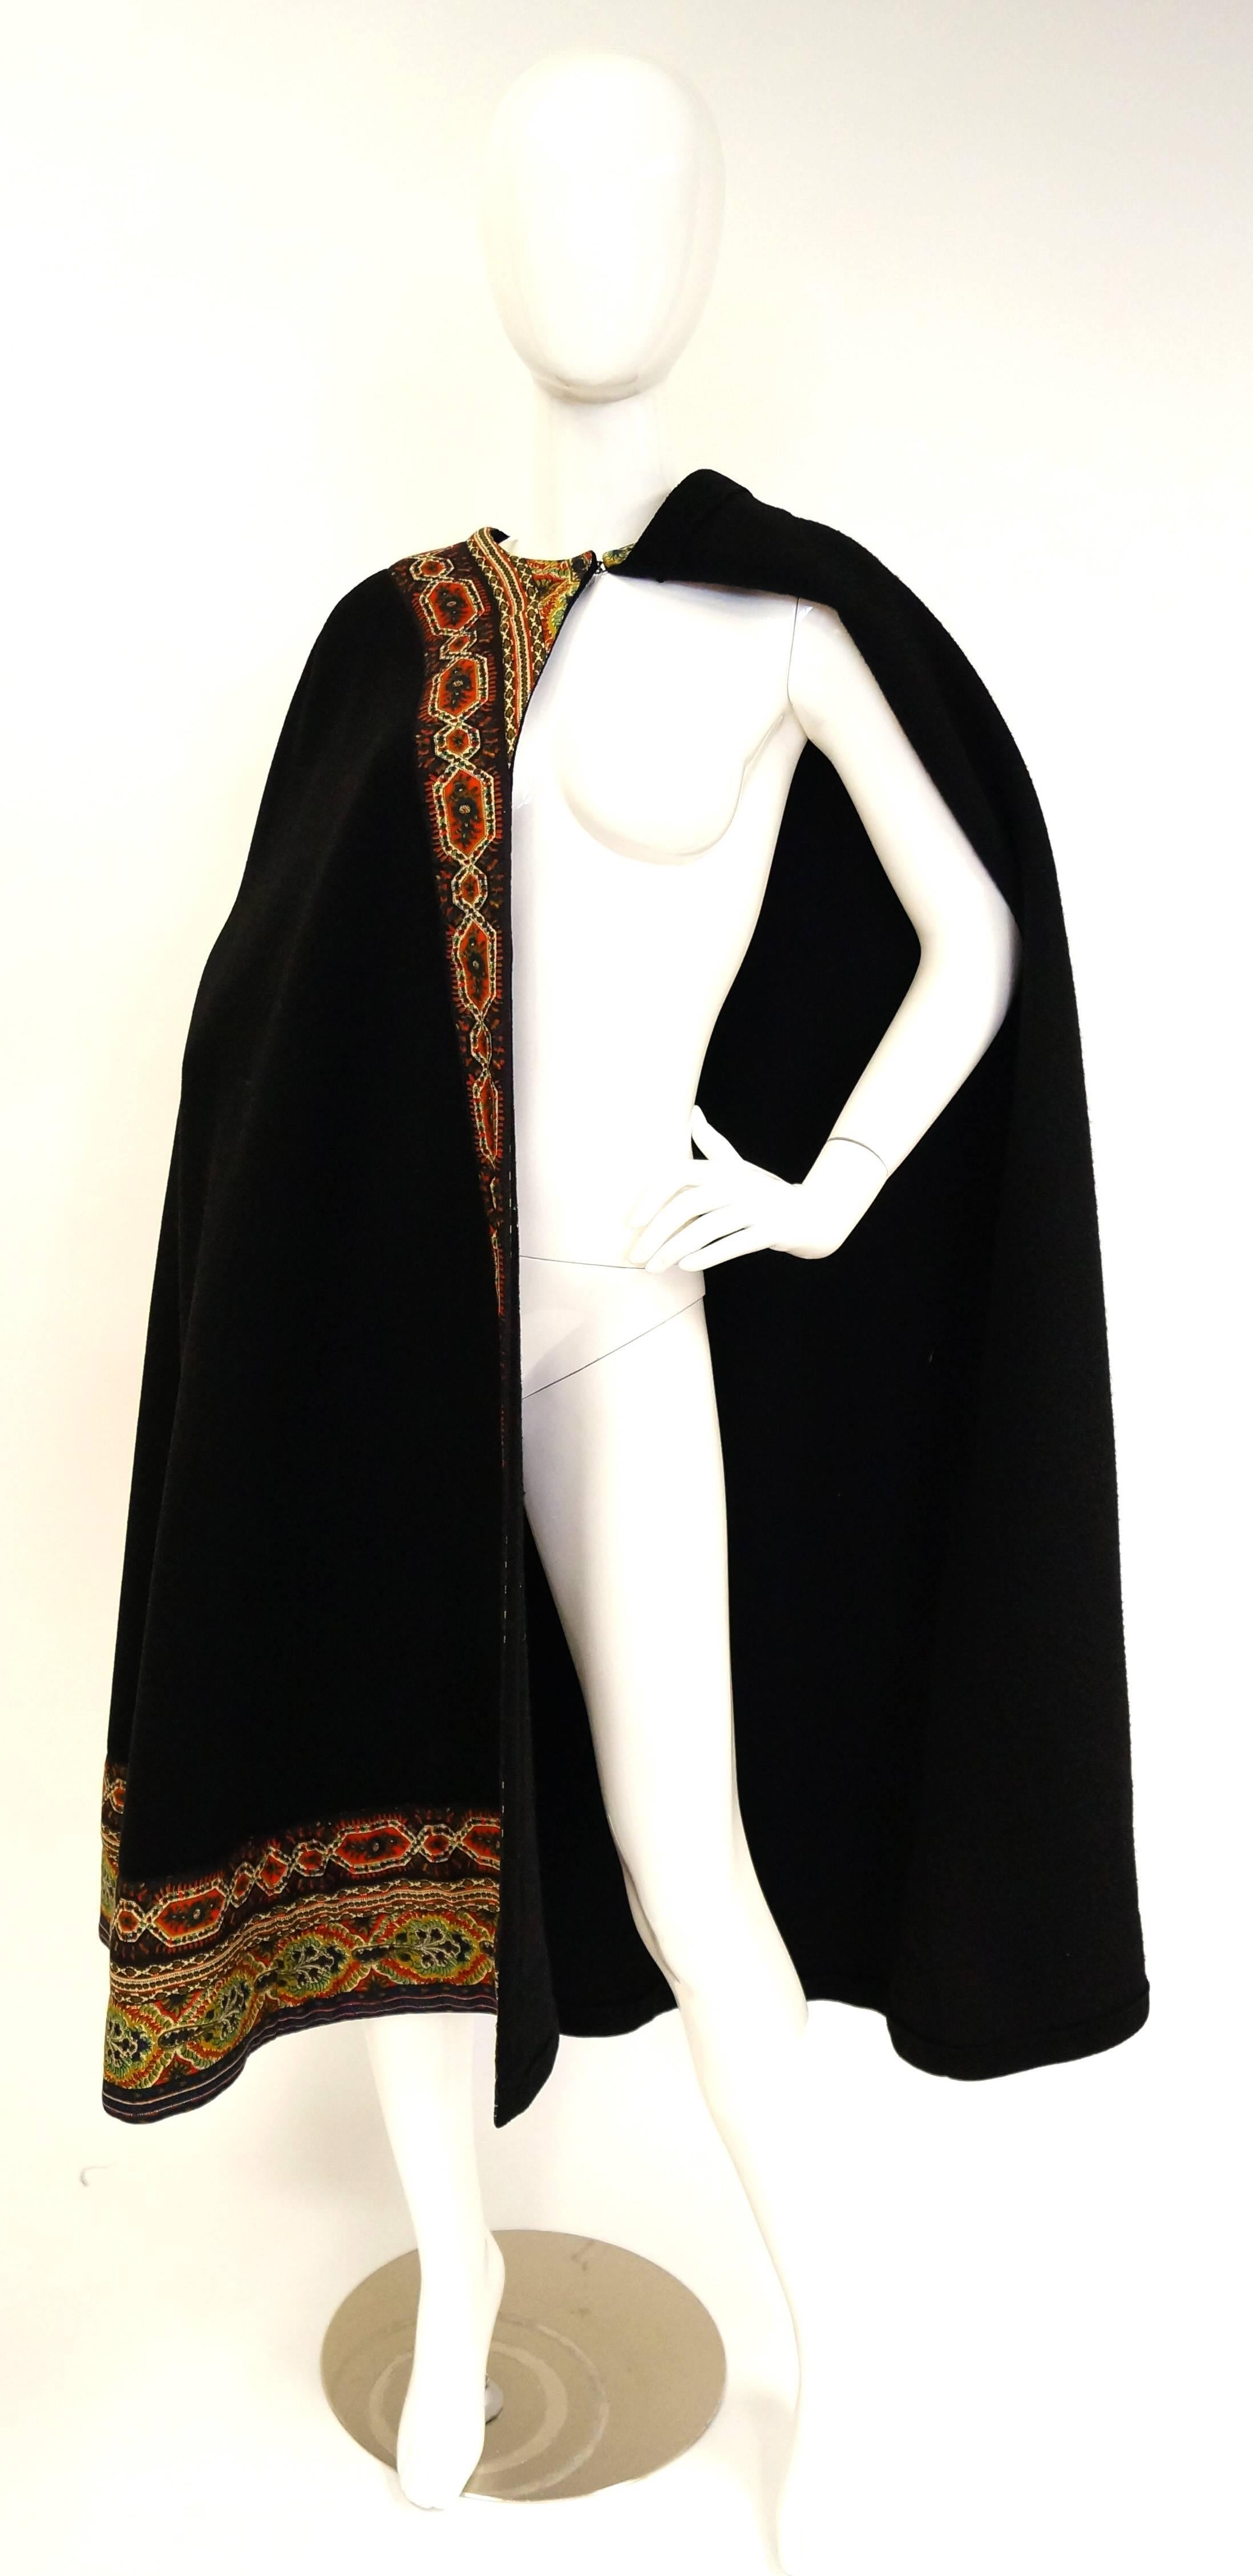 This mid century calf - length wool cloak by Oscar de La Renta is an absolute delight! The cloak is made of soft, thick black wool, and features a bright and colorful bohemian trim. The floral and geometric trim extends around the collar and down